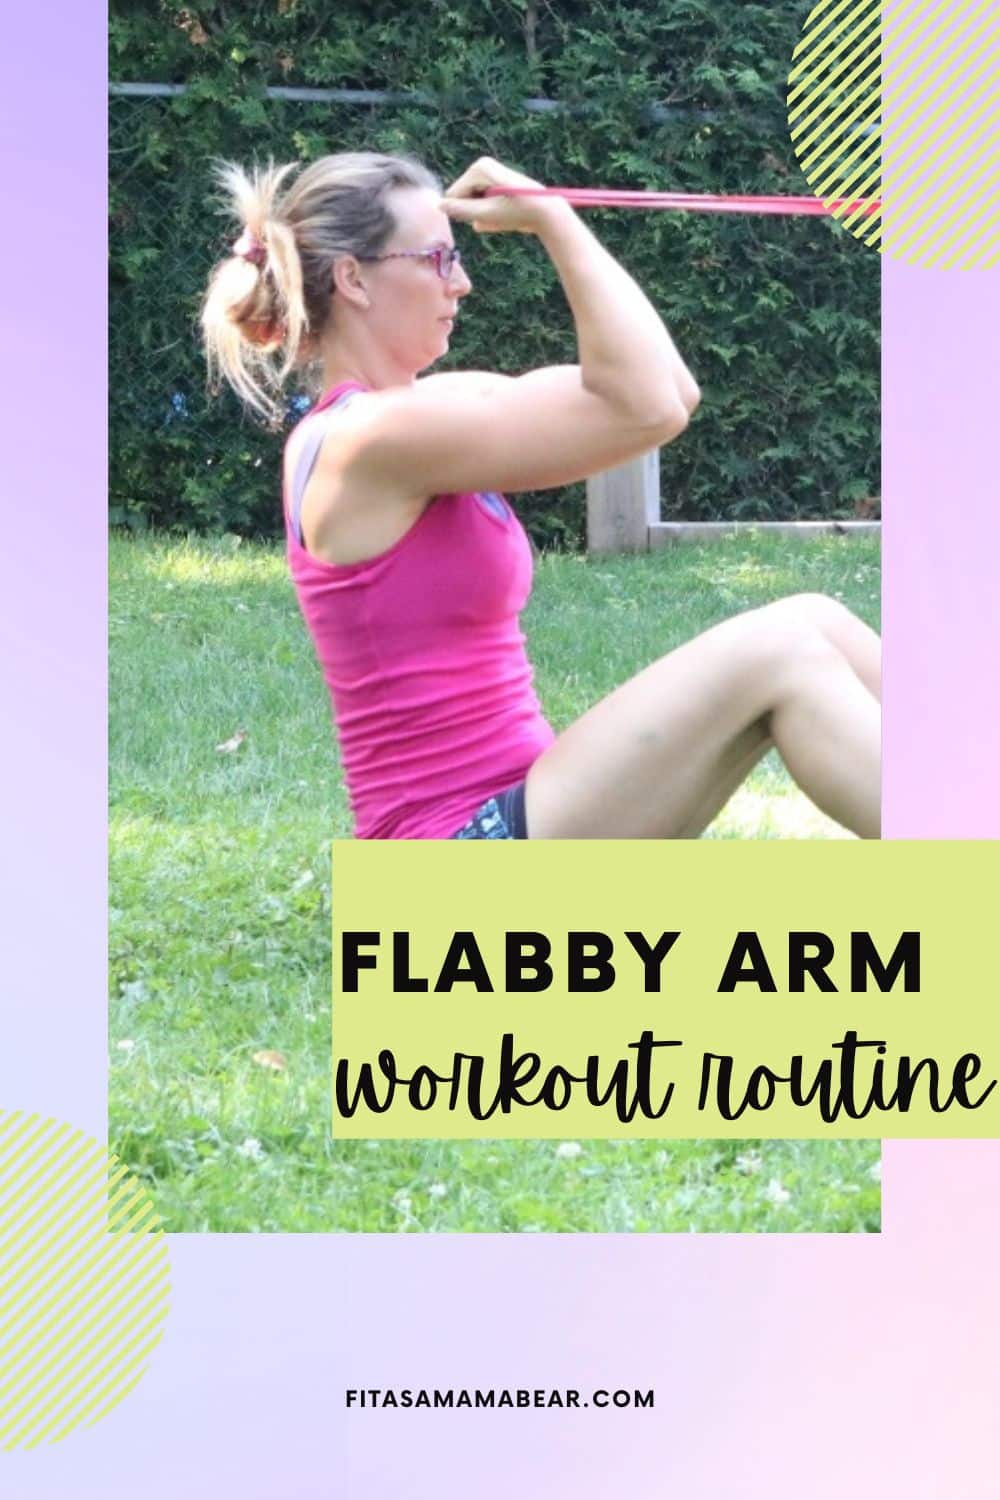 10 Resistance Band Exercises to Tone & Sculpt Your Arms